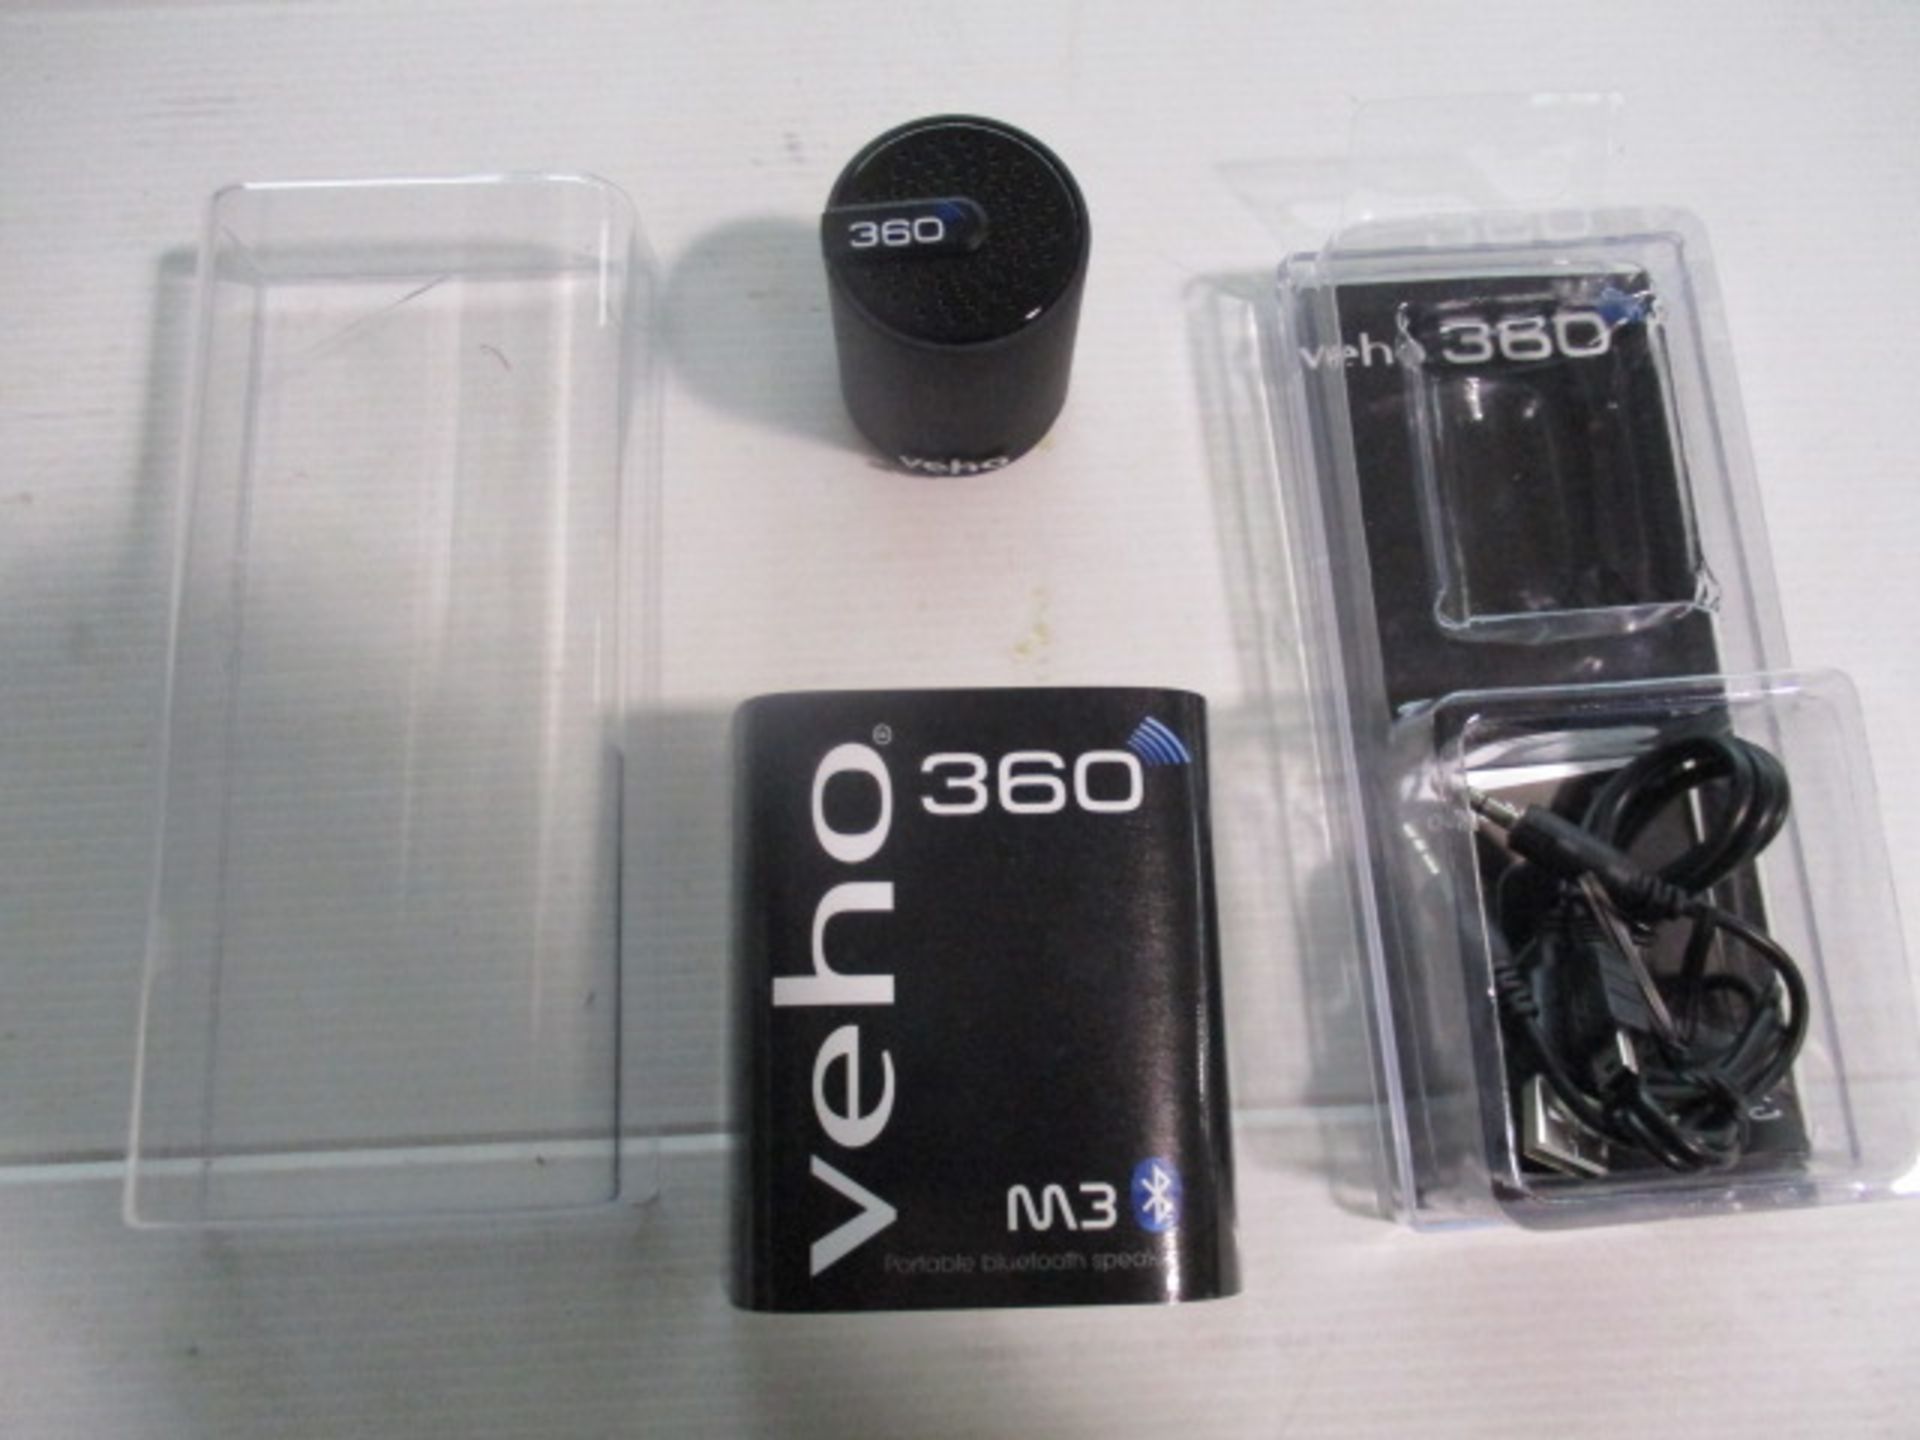 Veho360 Bluetooth Wireless Speaker kit boxed and unchecked